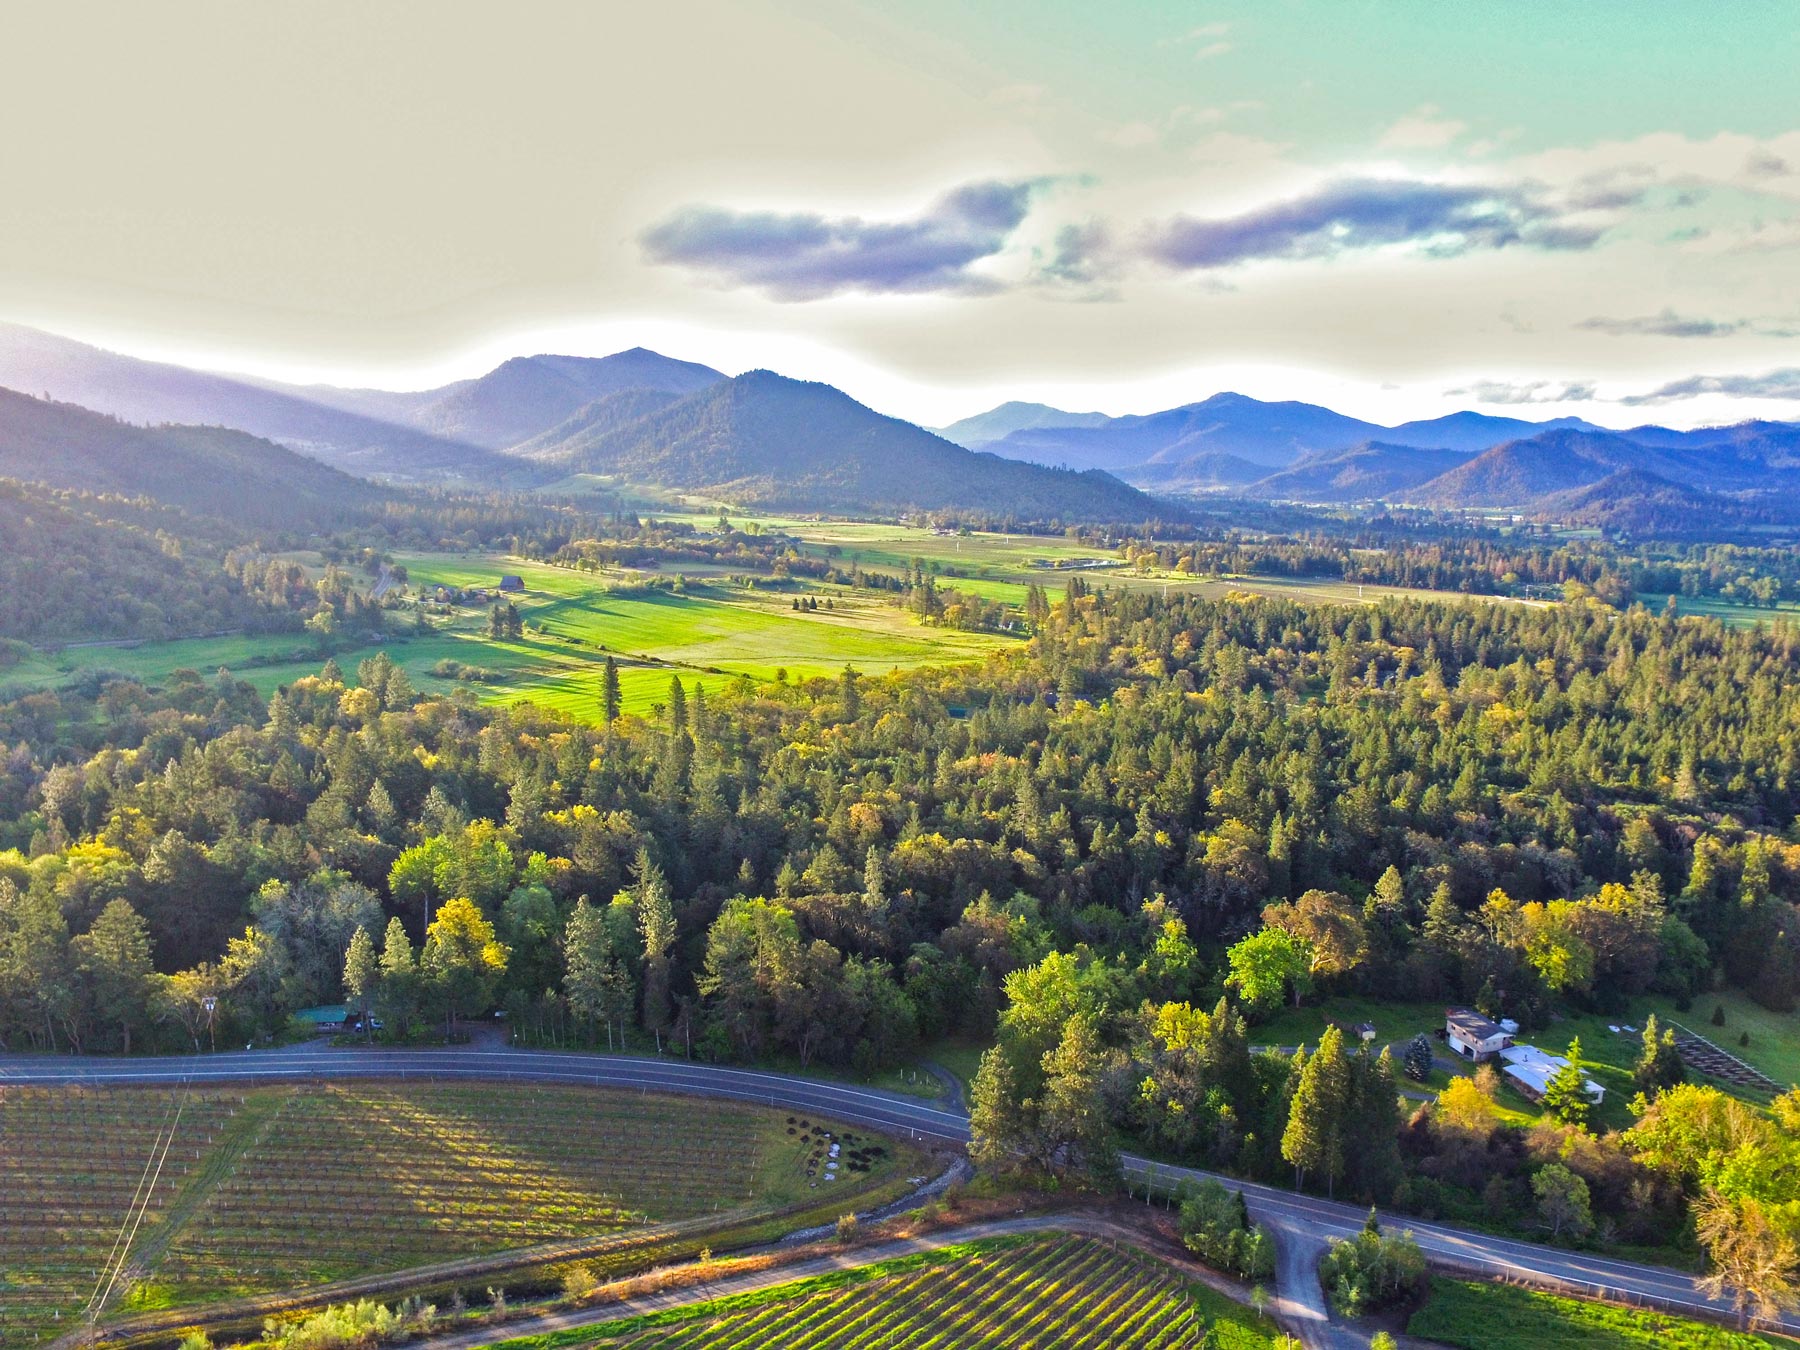 Neither like Napa or our neighbors to the North, Rogue Valley Wine Country is a unique appellation receiving high accolades for  excepation wines and diverse varietals.